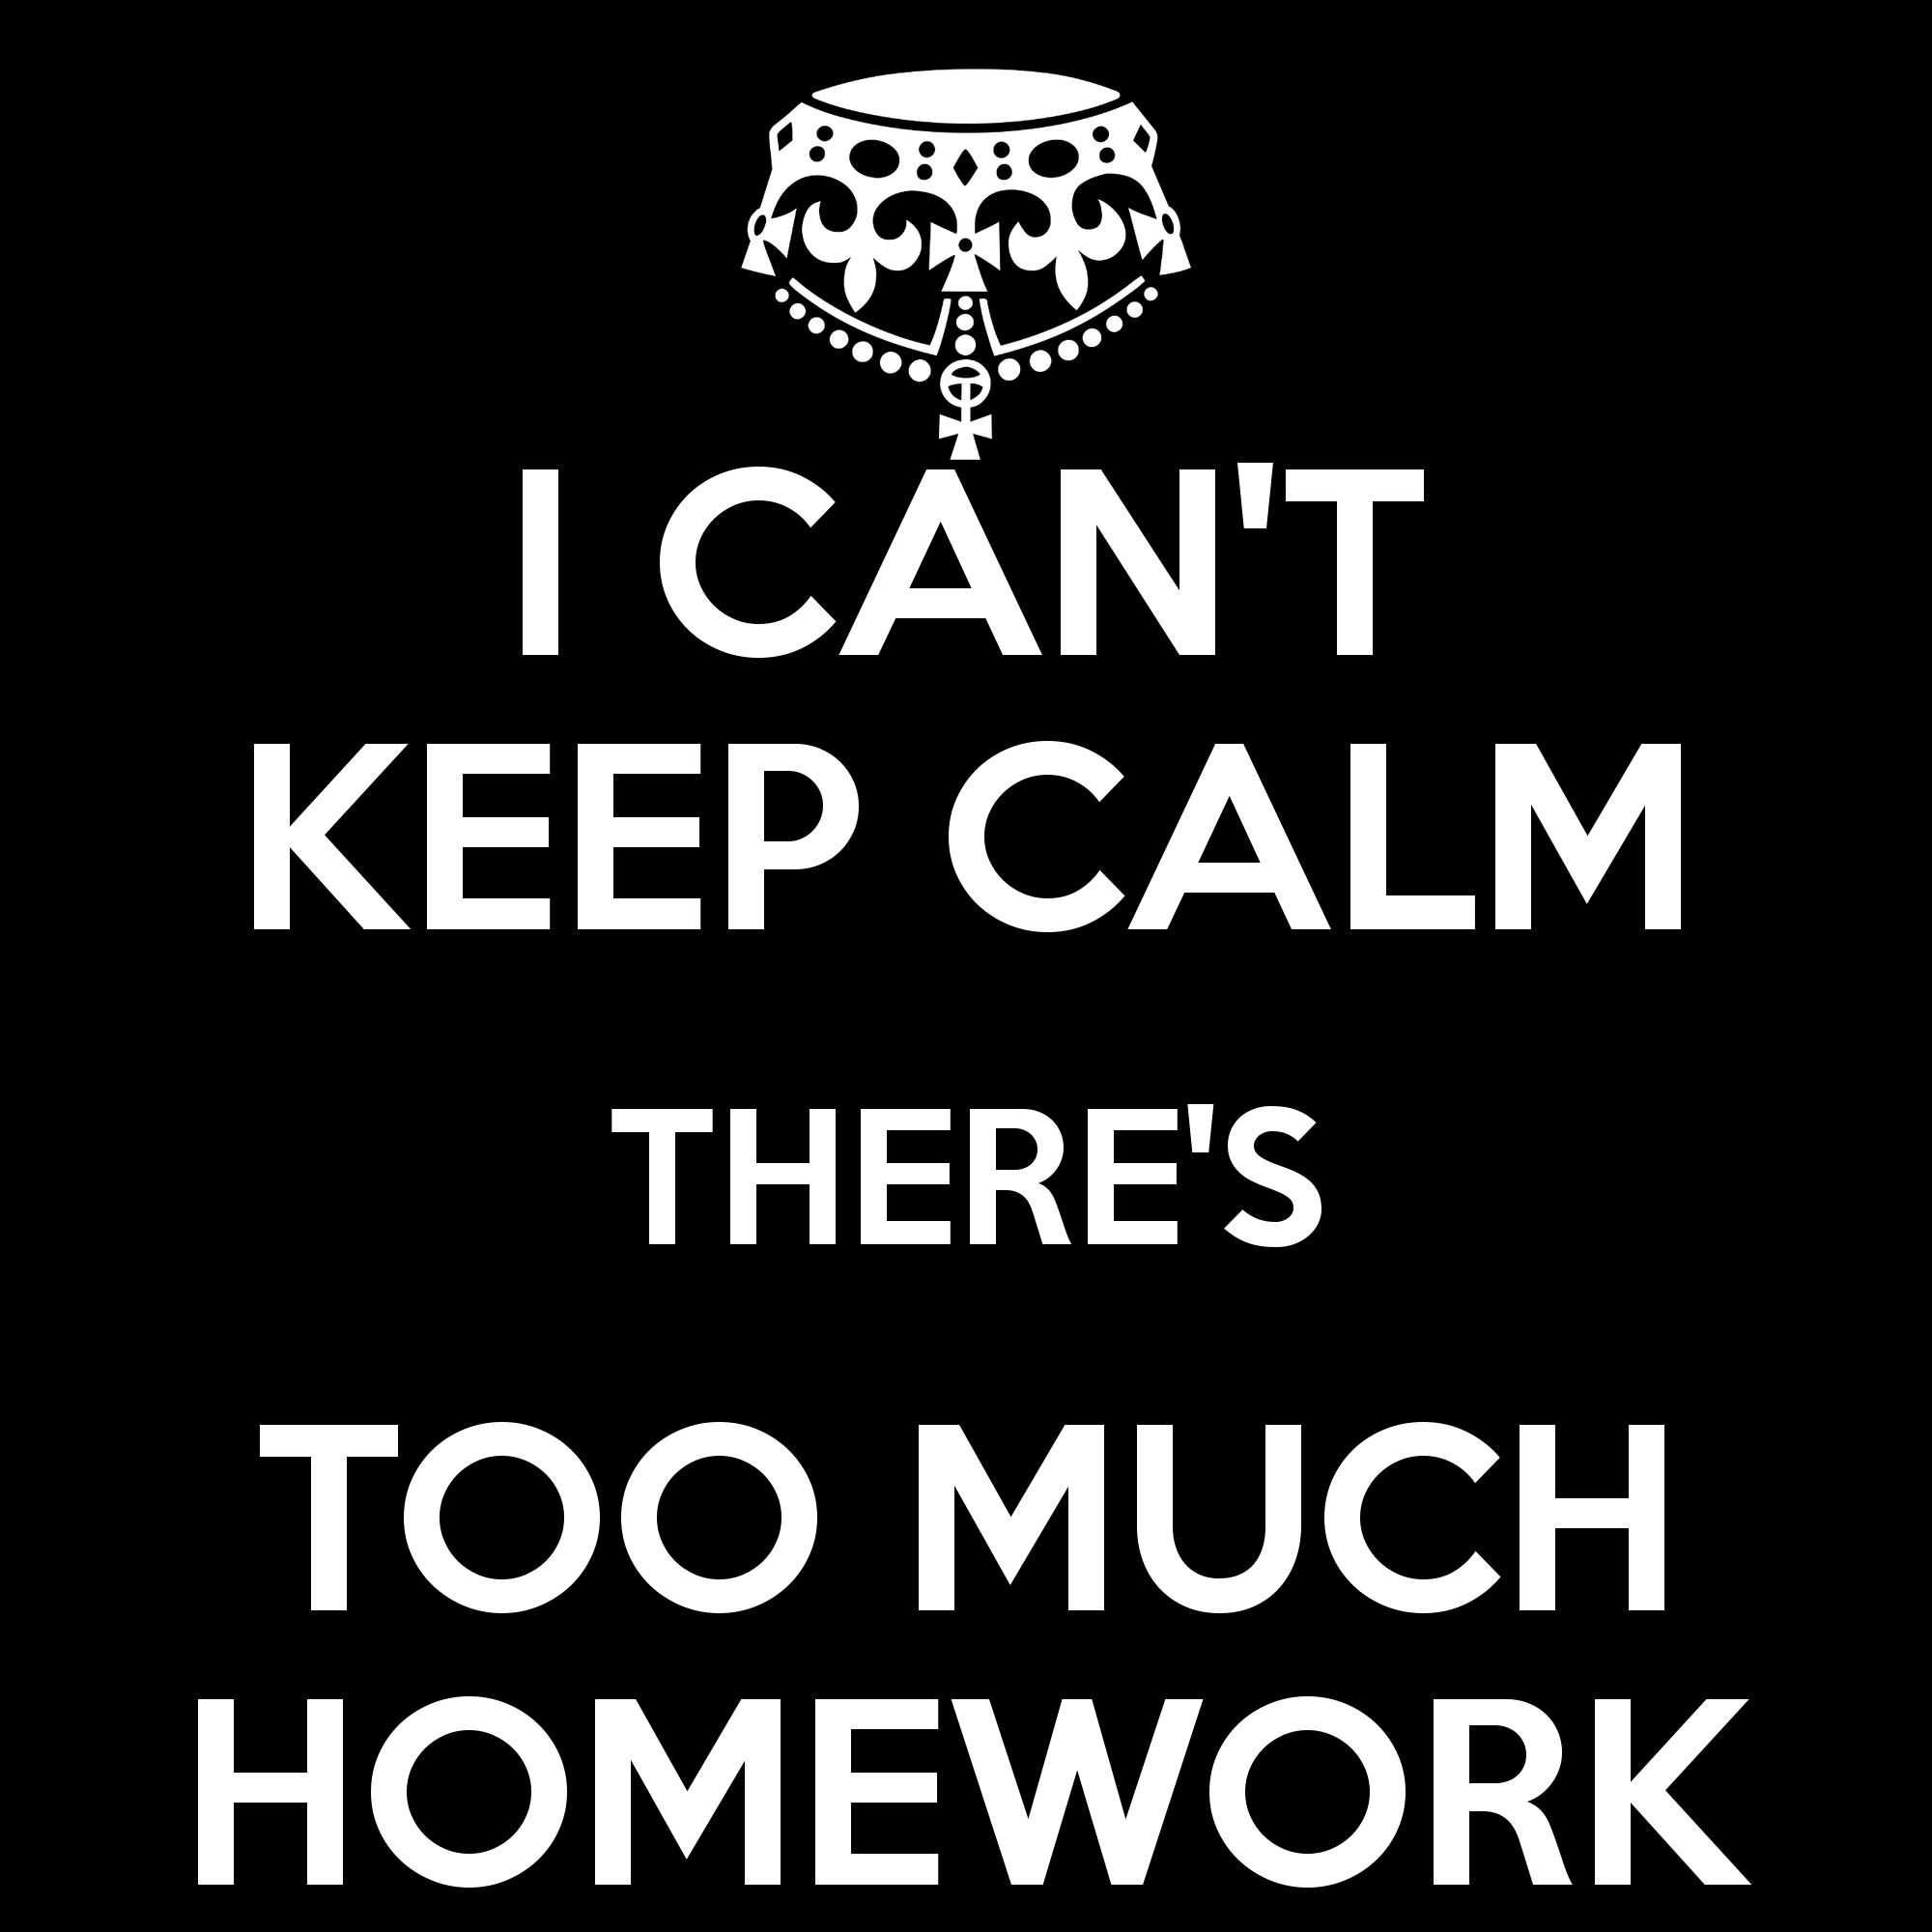 Homework: How Much is Too Much?